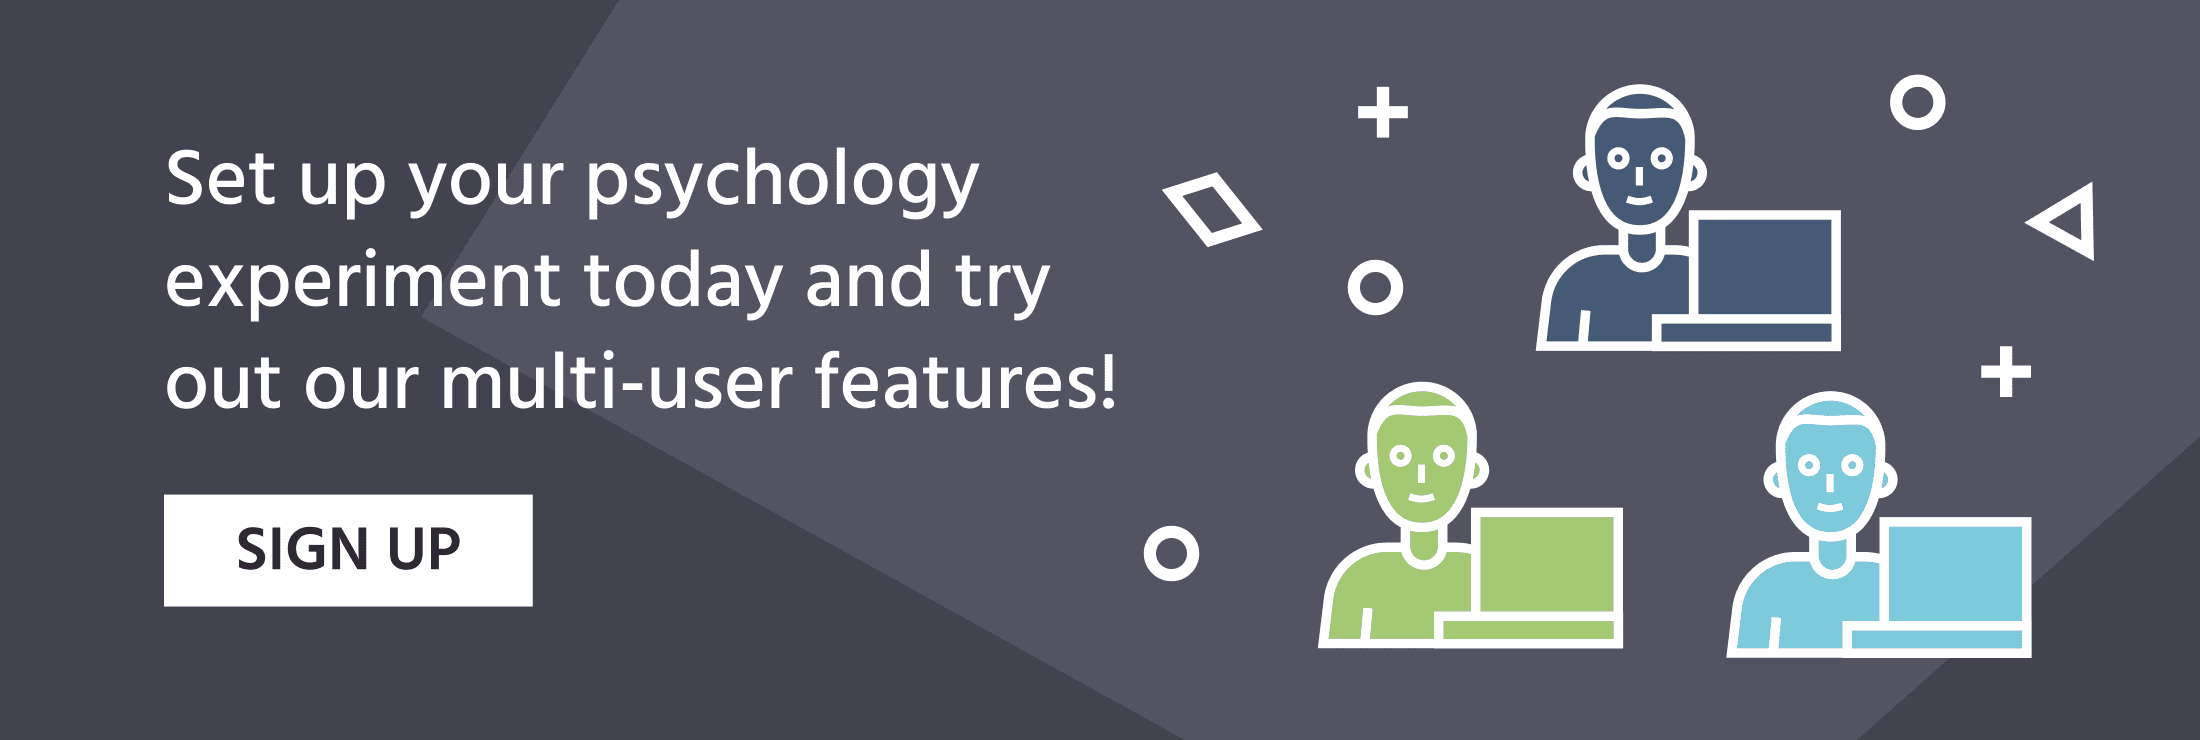 Set up your psychology experiment today and try out our multi-user features in Labvanced.